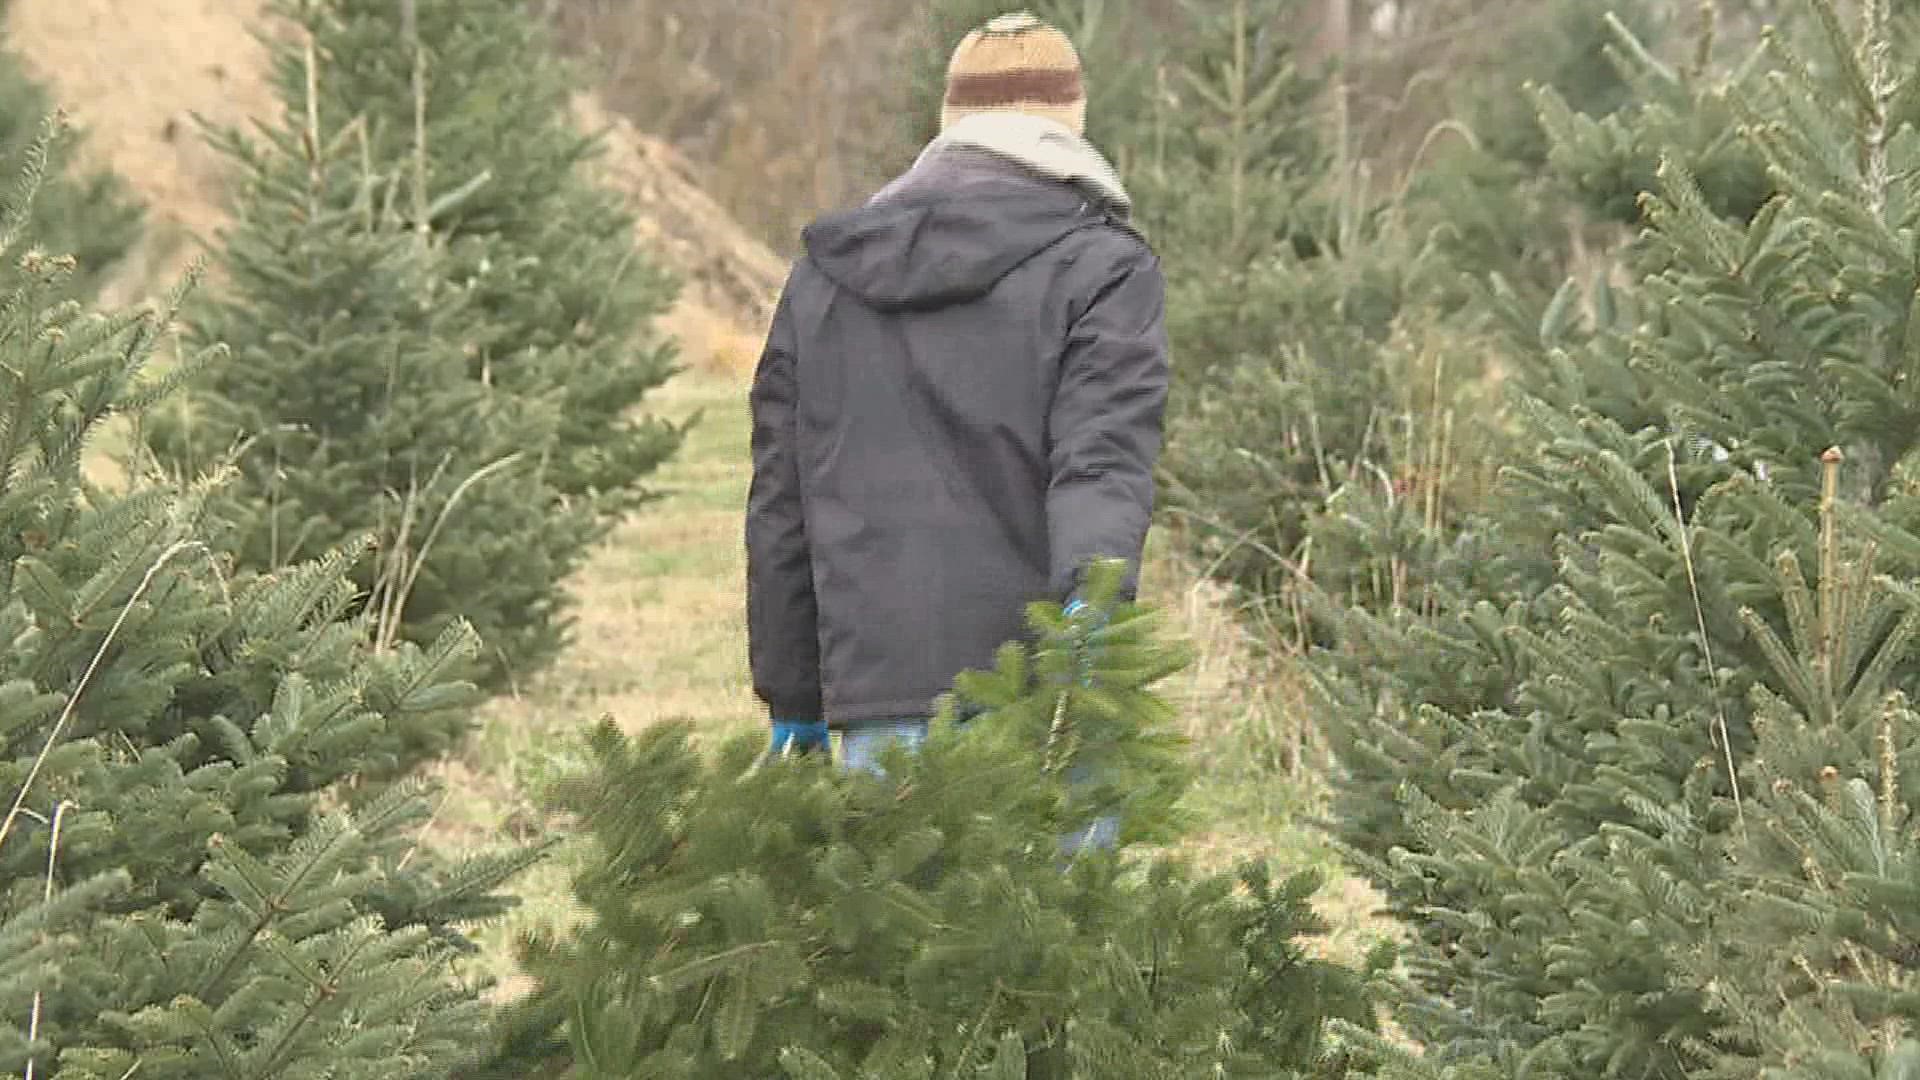 Wyffels Tree Farm opened for the season on Friday, Nov. 26 and several families came to continue the tradition of cutting down their Christmas tree.